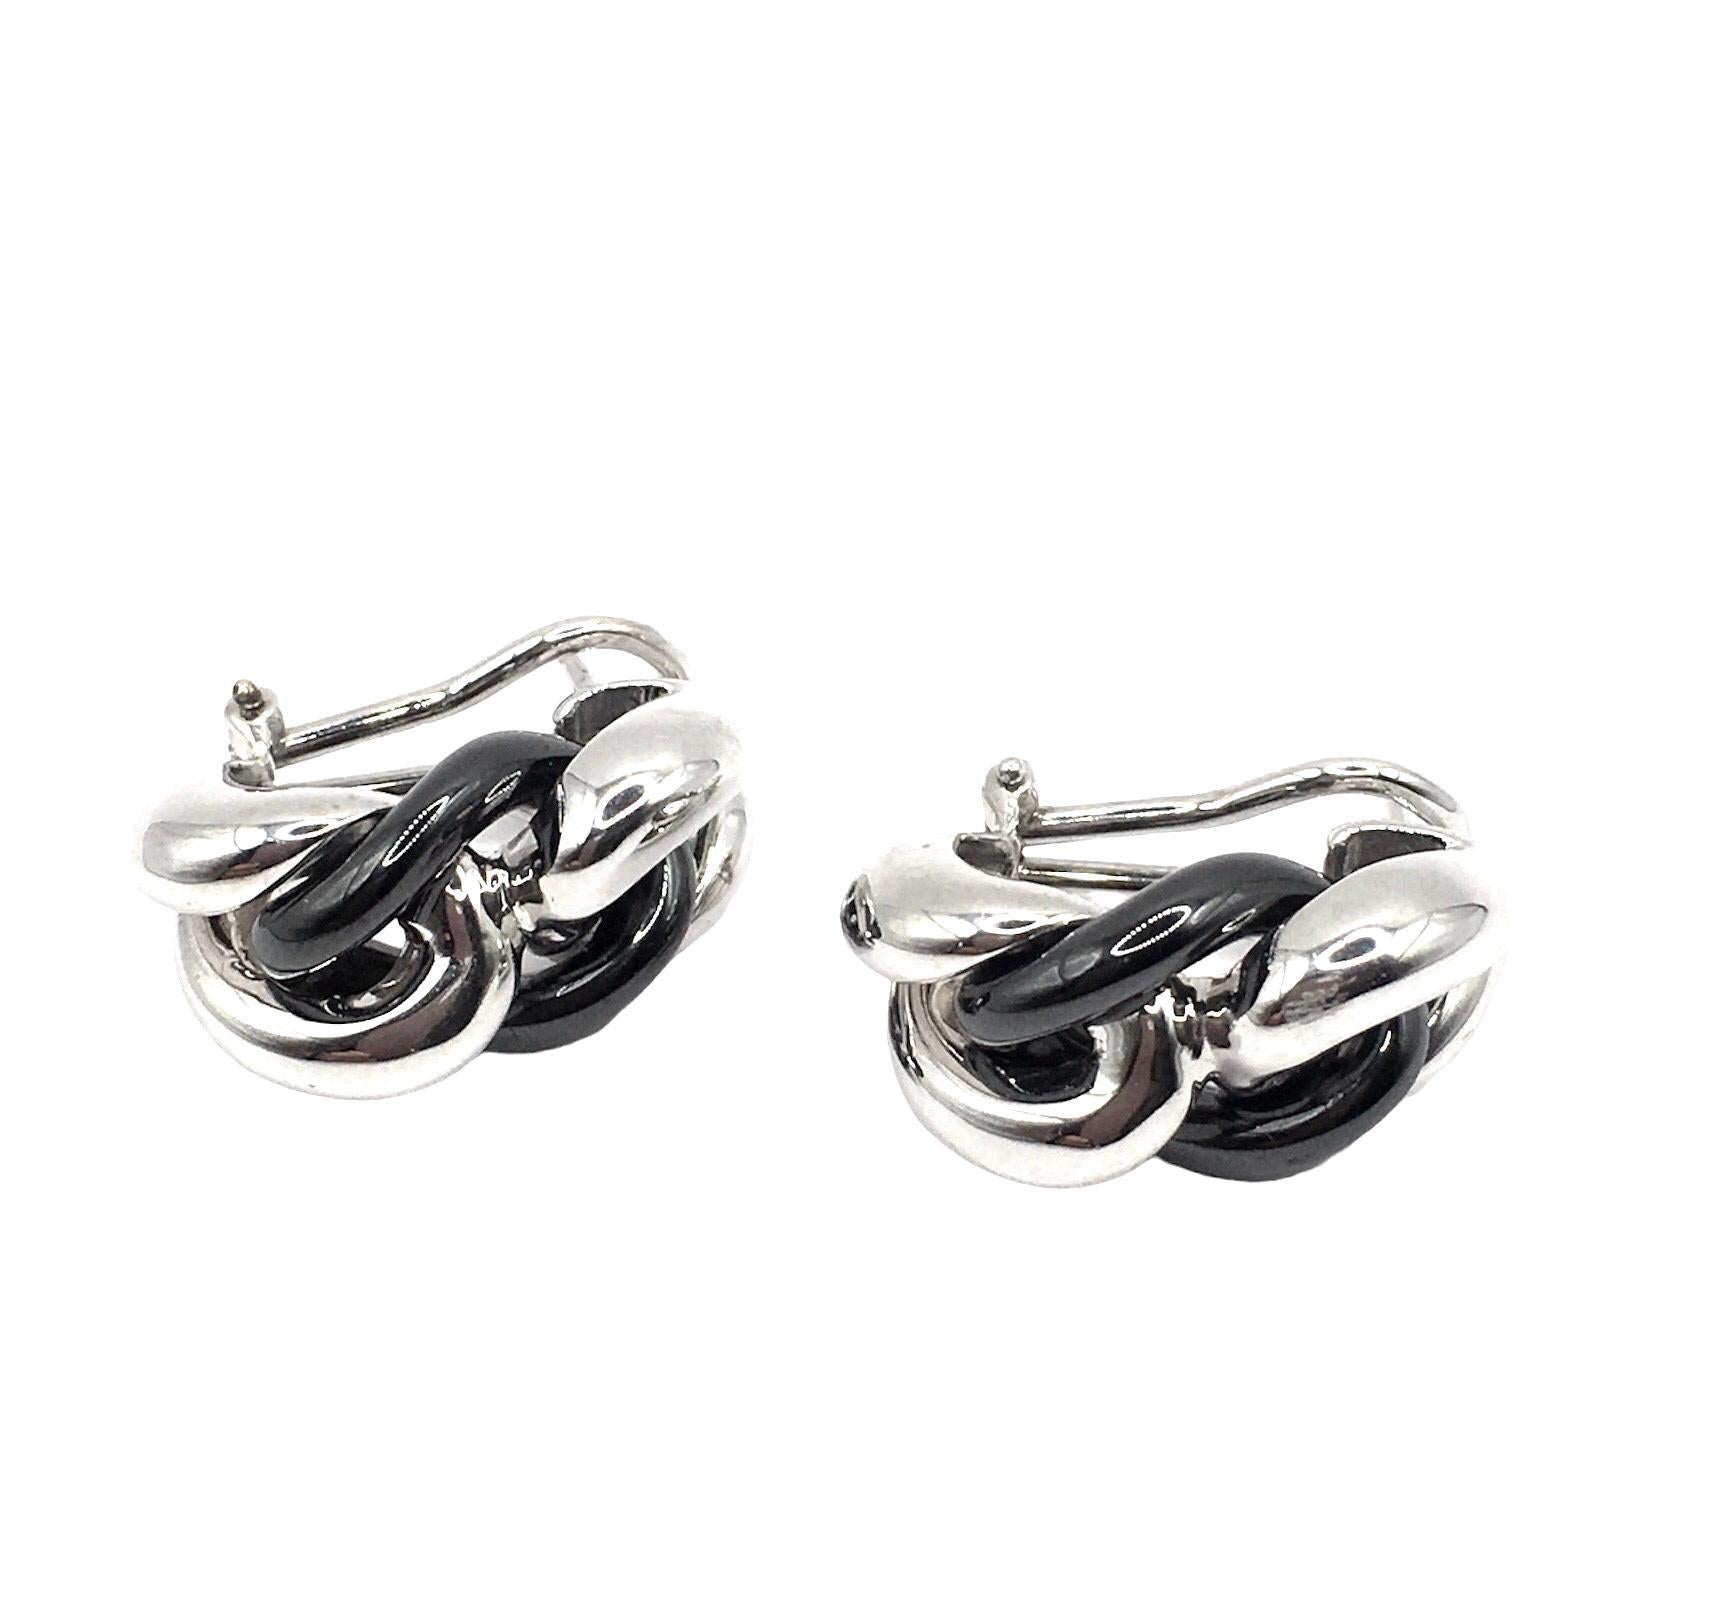 Black ceramic groumette pair of earrings 18 kt white gold In New Condition For Sale In Milano, Lombardia